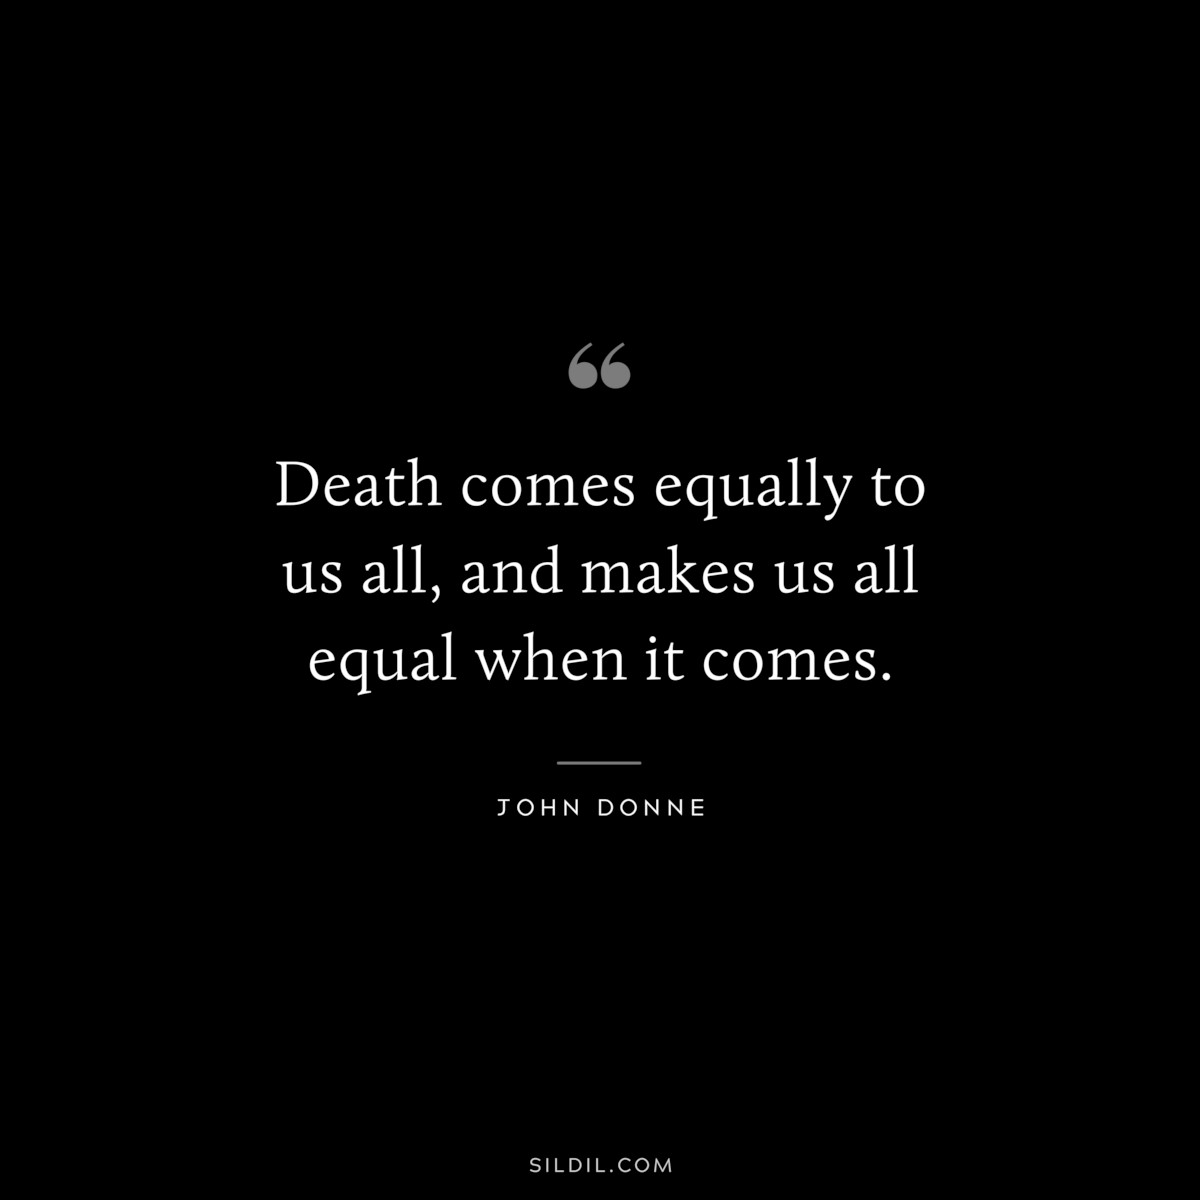 Death comes equally to us all, and makes us all equal when it comes. ― John Donne